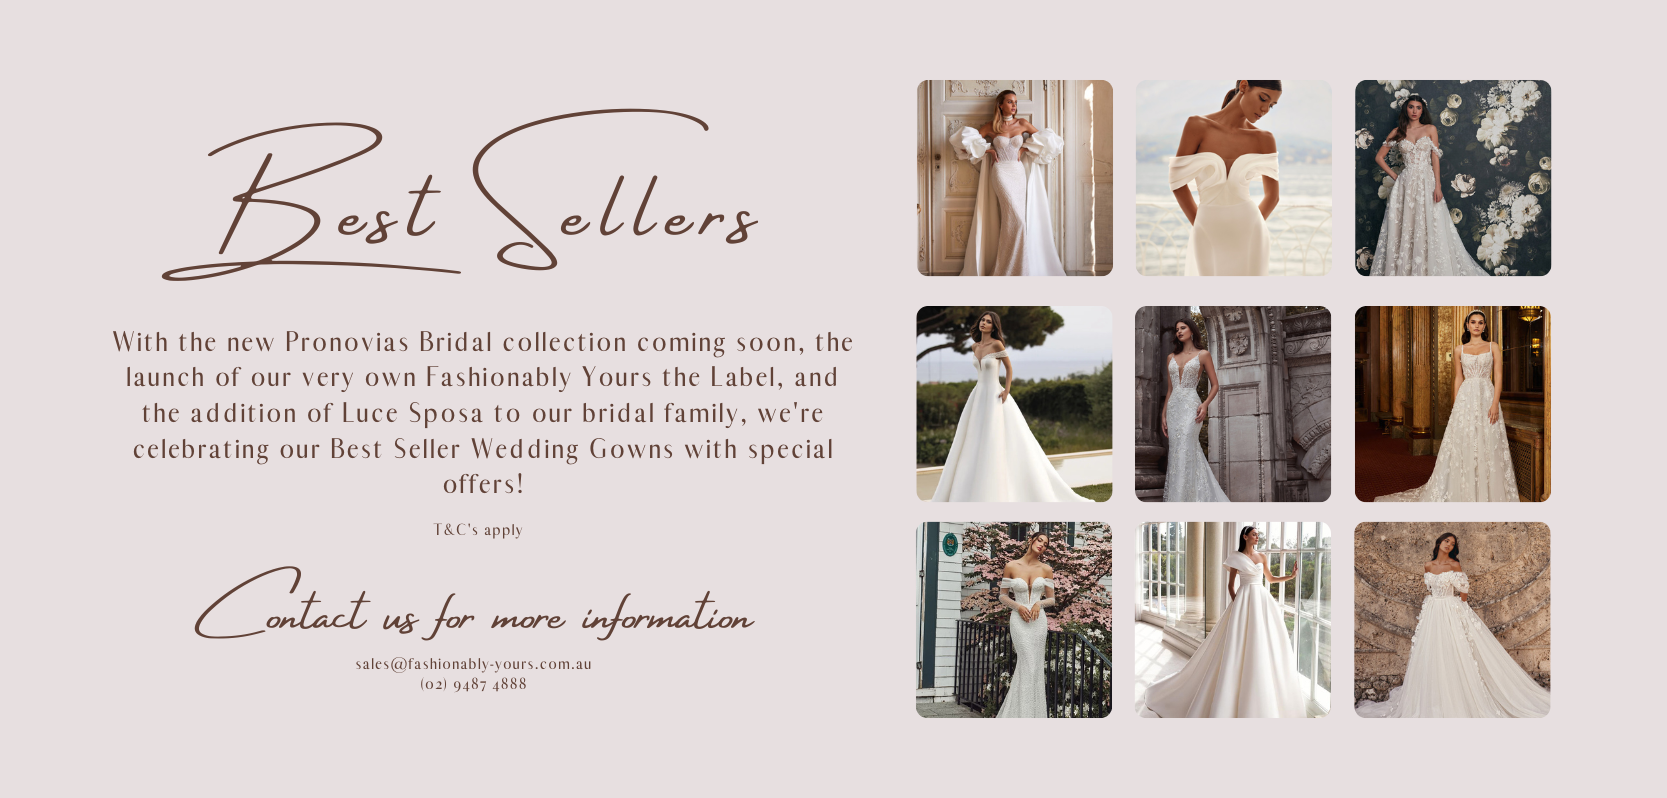 Formally Yours Suit sales & Formal Wear